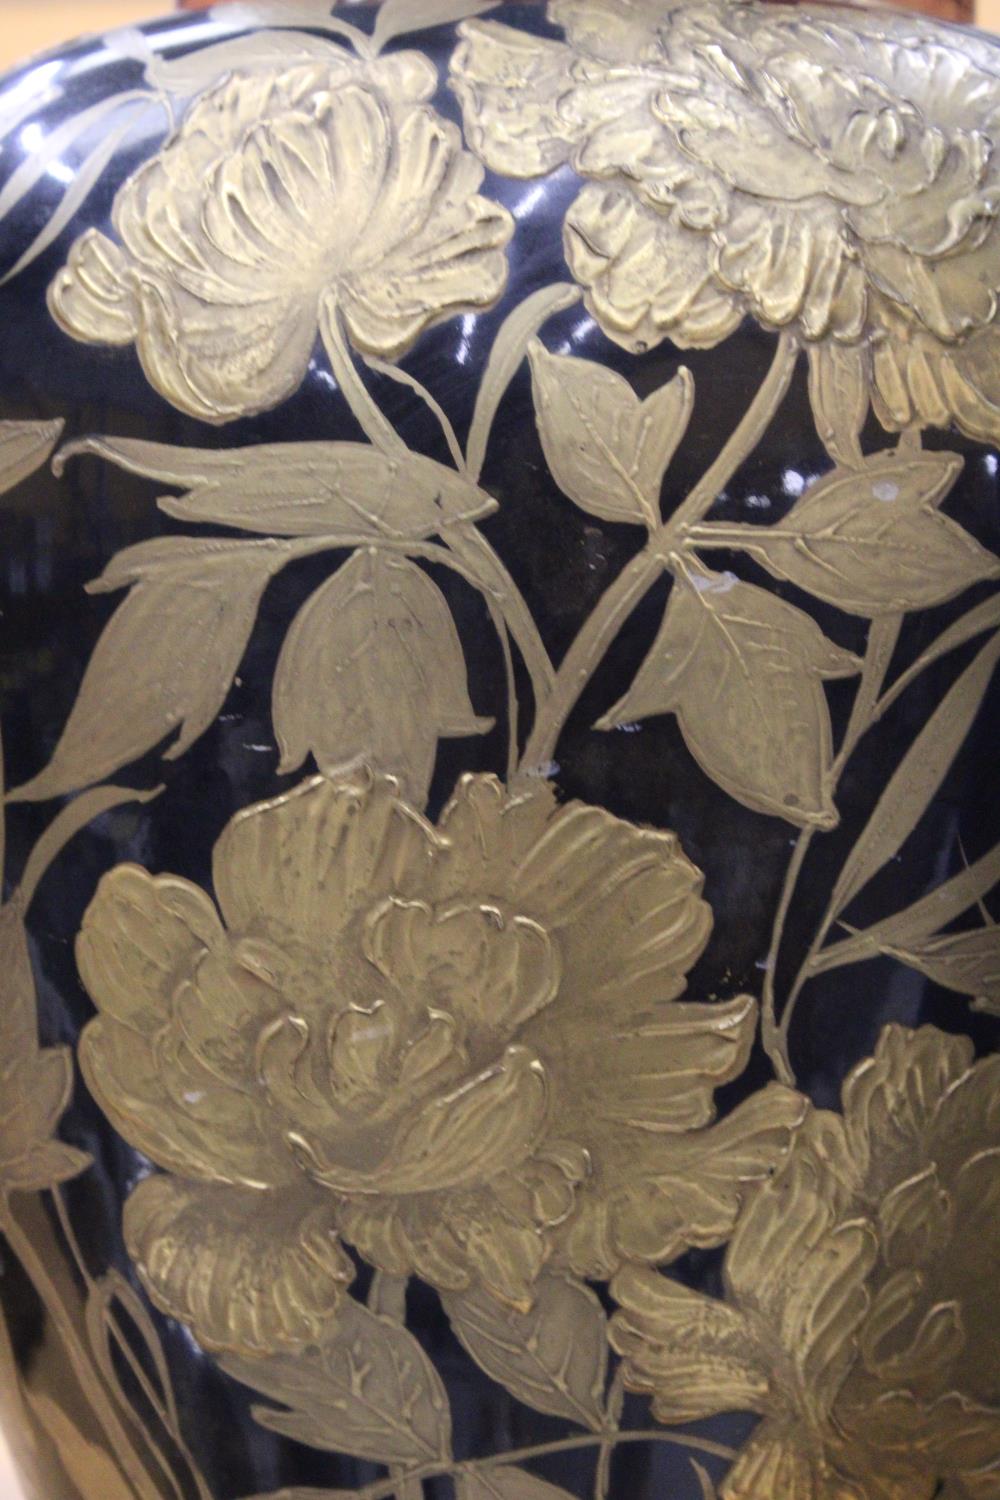 A LARGE VASE WITH GOLD EMBOSSED FLORALS PAINTED IN 22 CT GOLD - Image 3 of 4